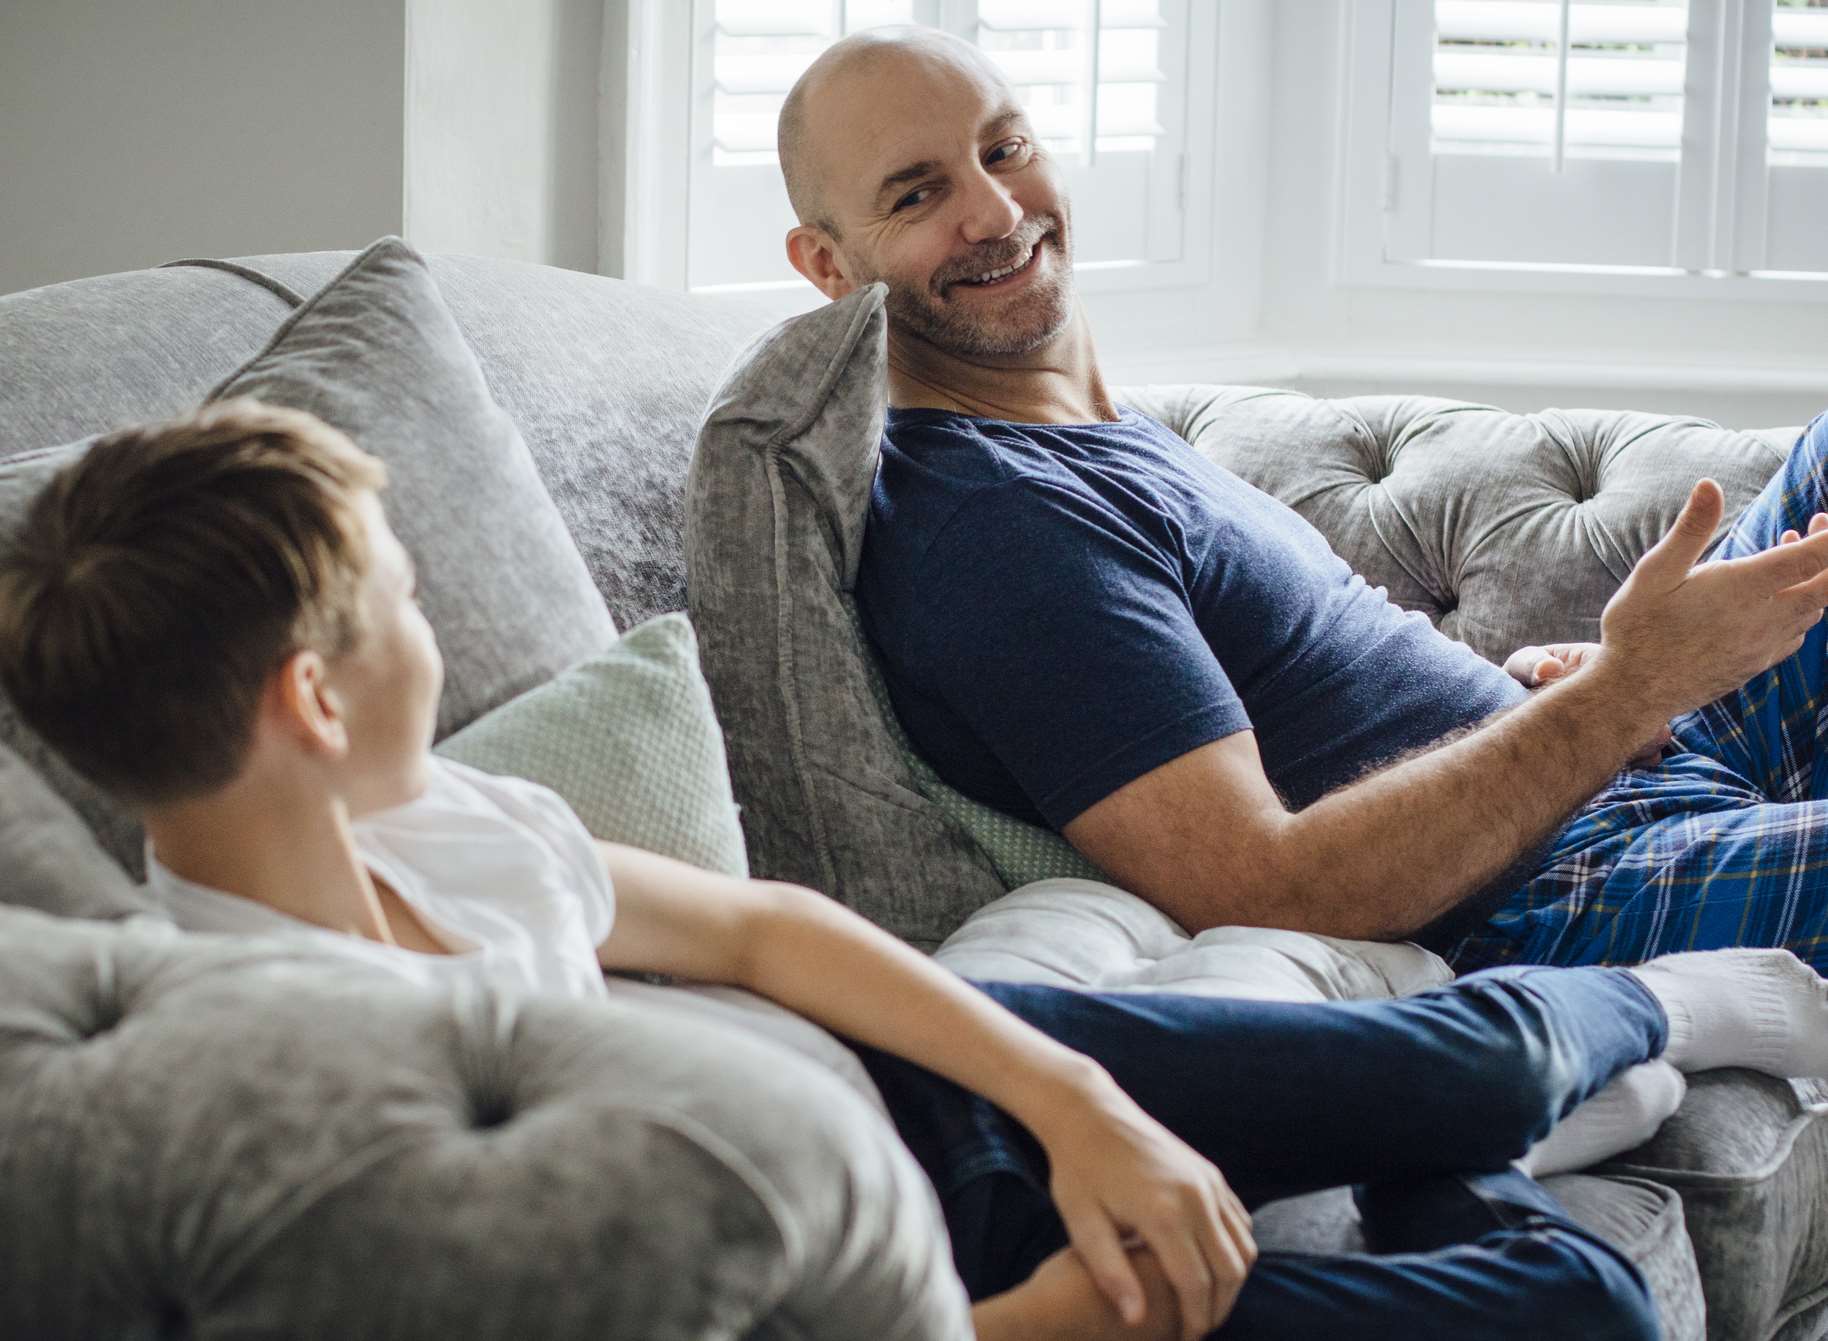 The survey found that 44%t of dads have felt uncomfortable talking to their children about certain subjects